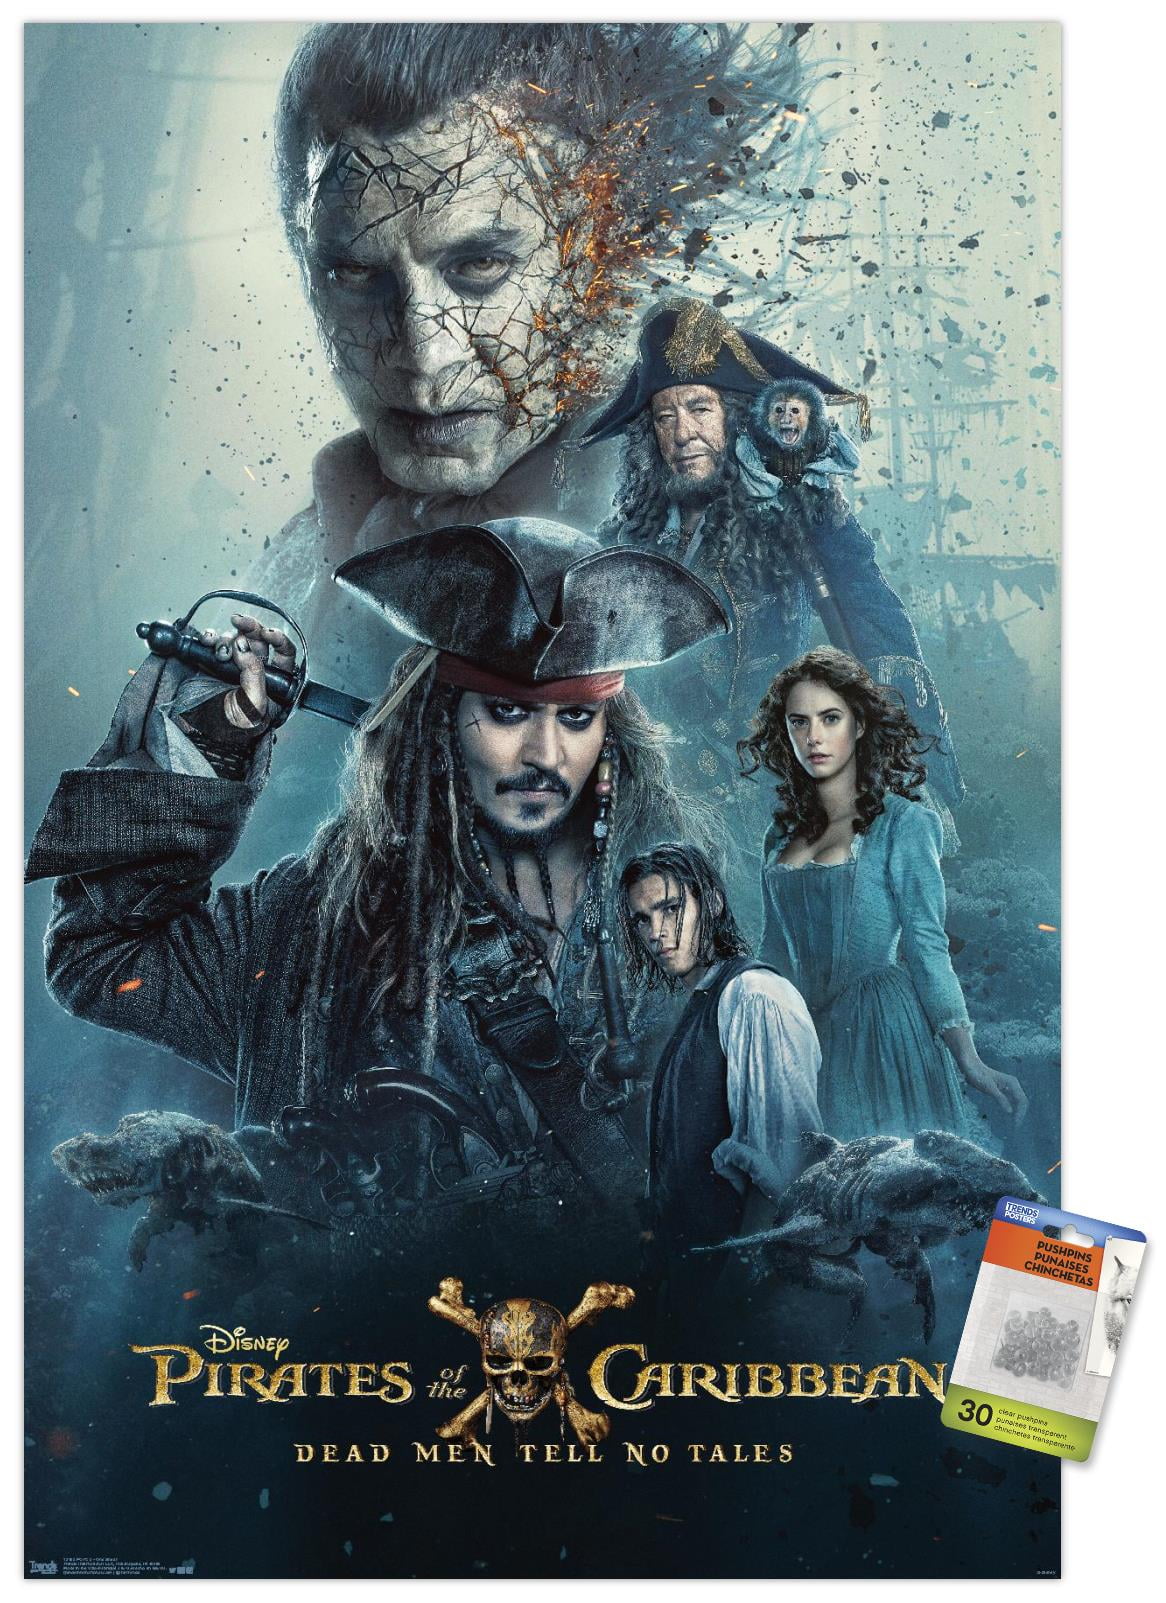 Disney Pirates of the Caribbean: Dead Men Tell No Tales - One Sheet Wall Poster with Push Pins, 22.375" x 34" - image 1 of 6